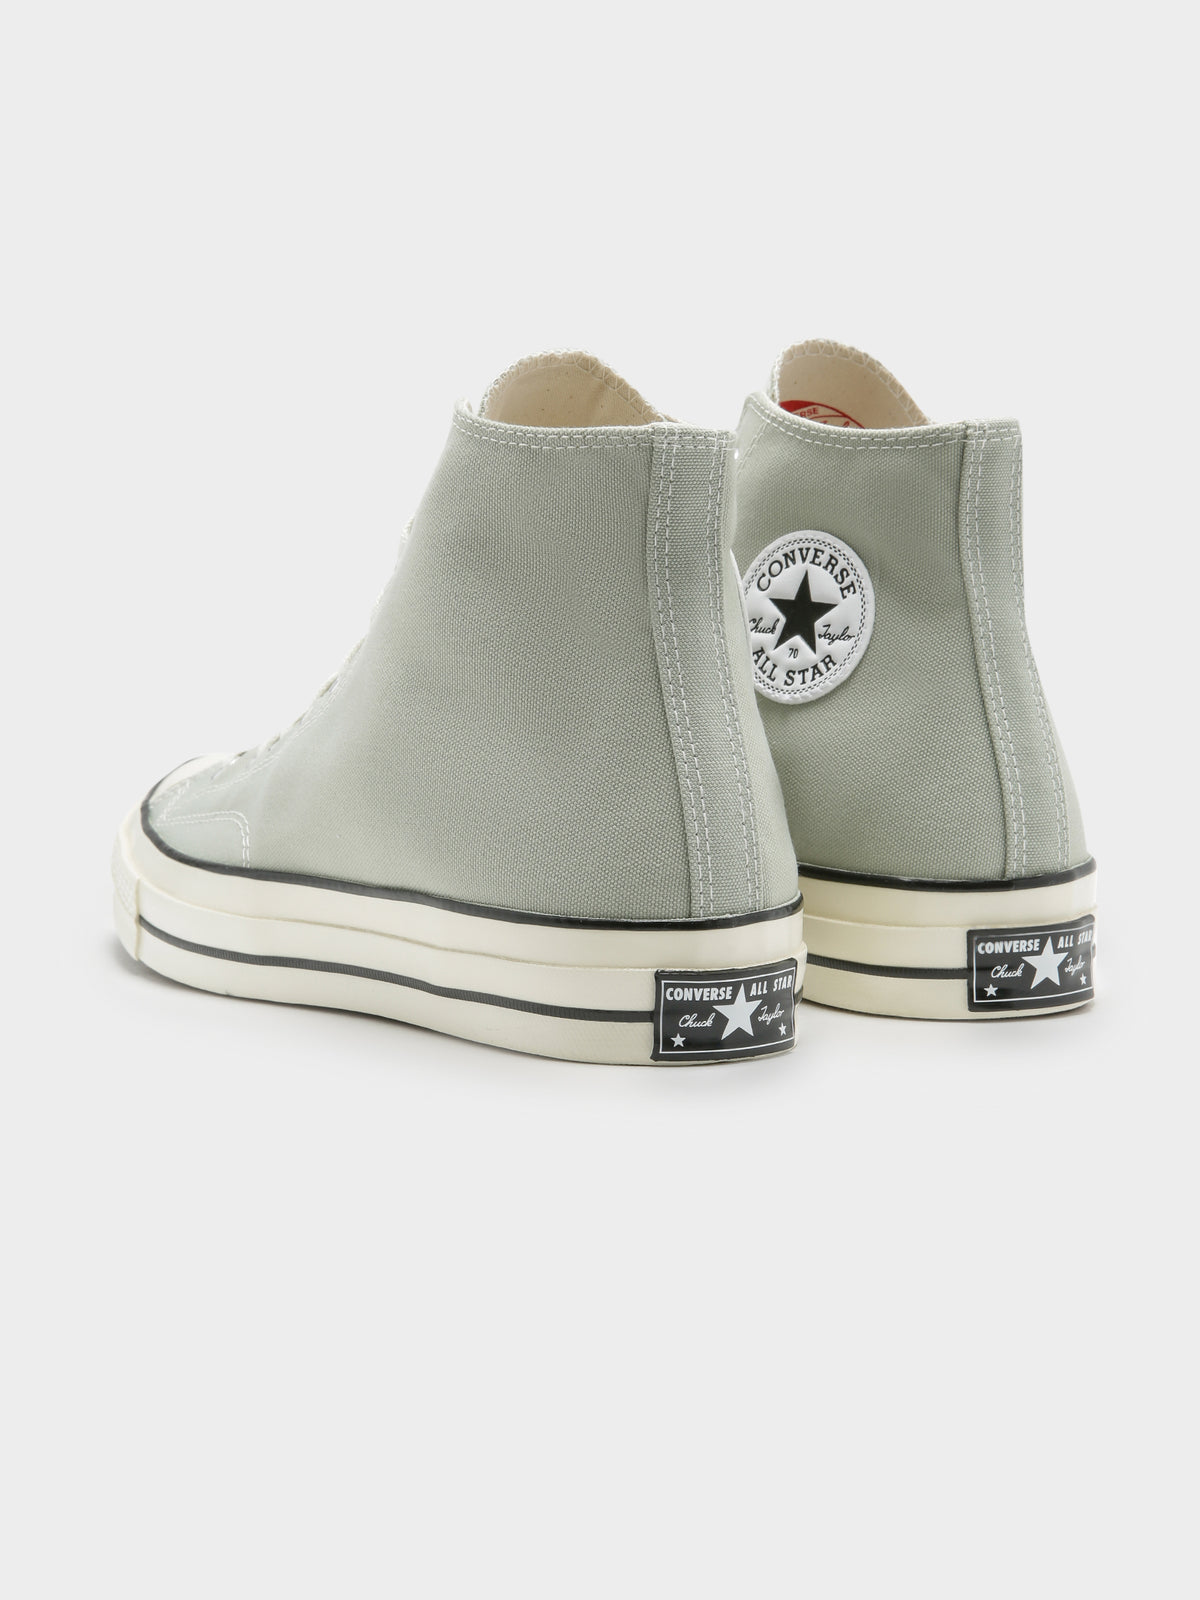 Unisex Chuck 70 High Sneakers in Summit Sage